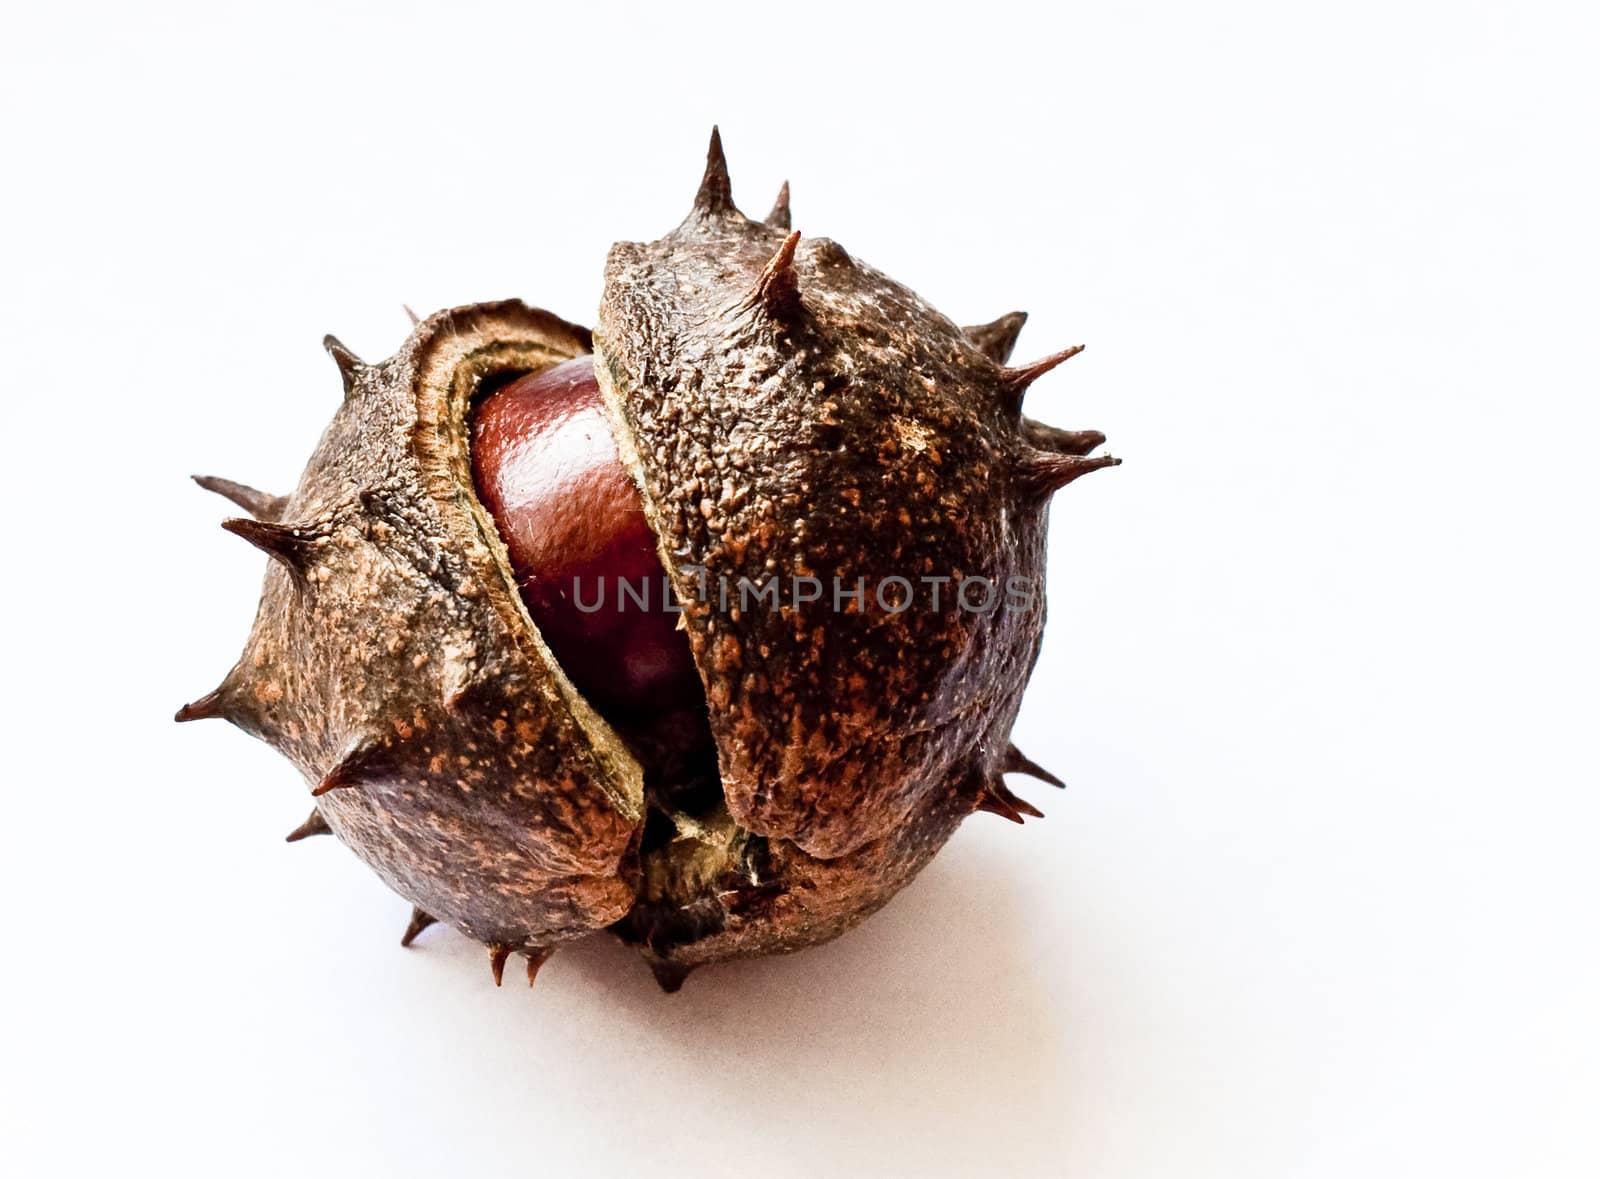 Horse Chestnut and spiky seed pod on a white background